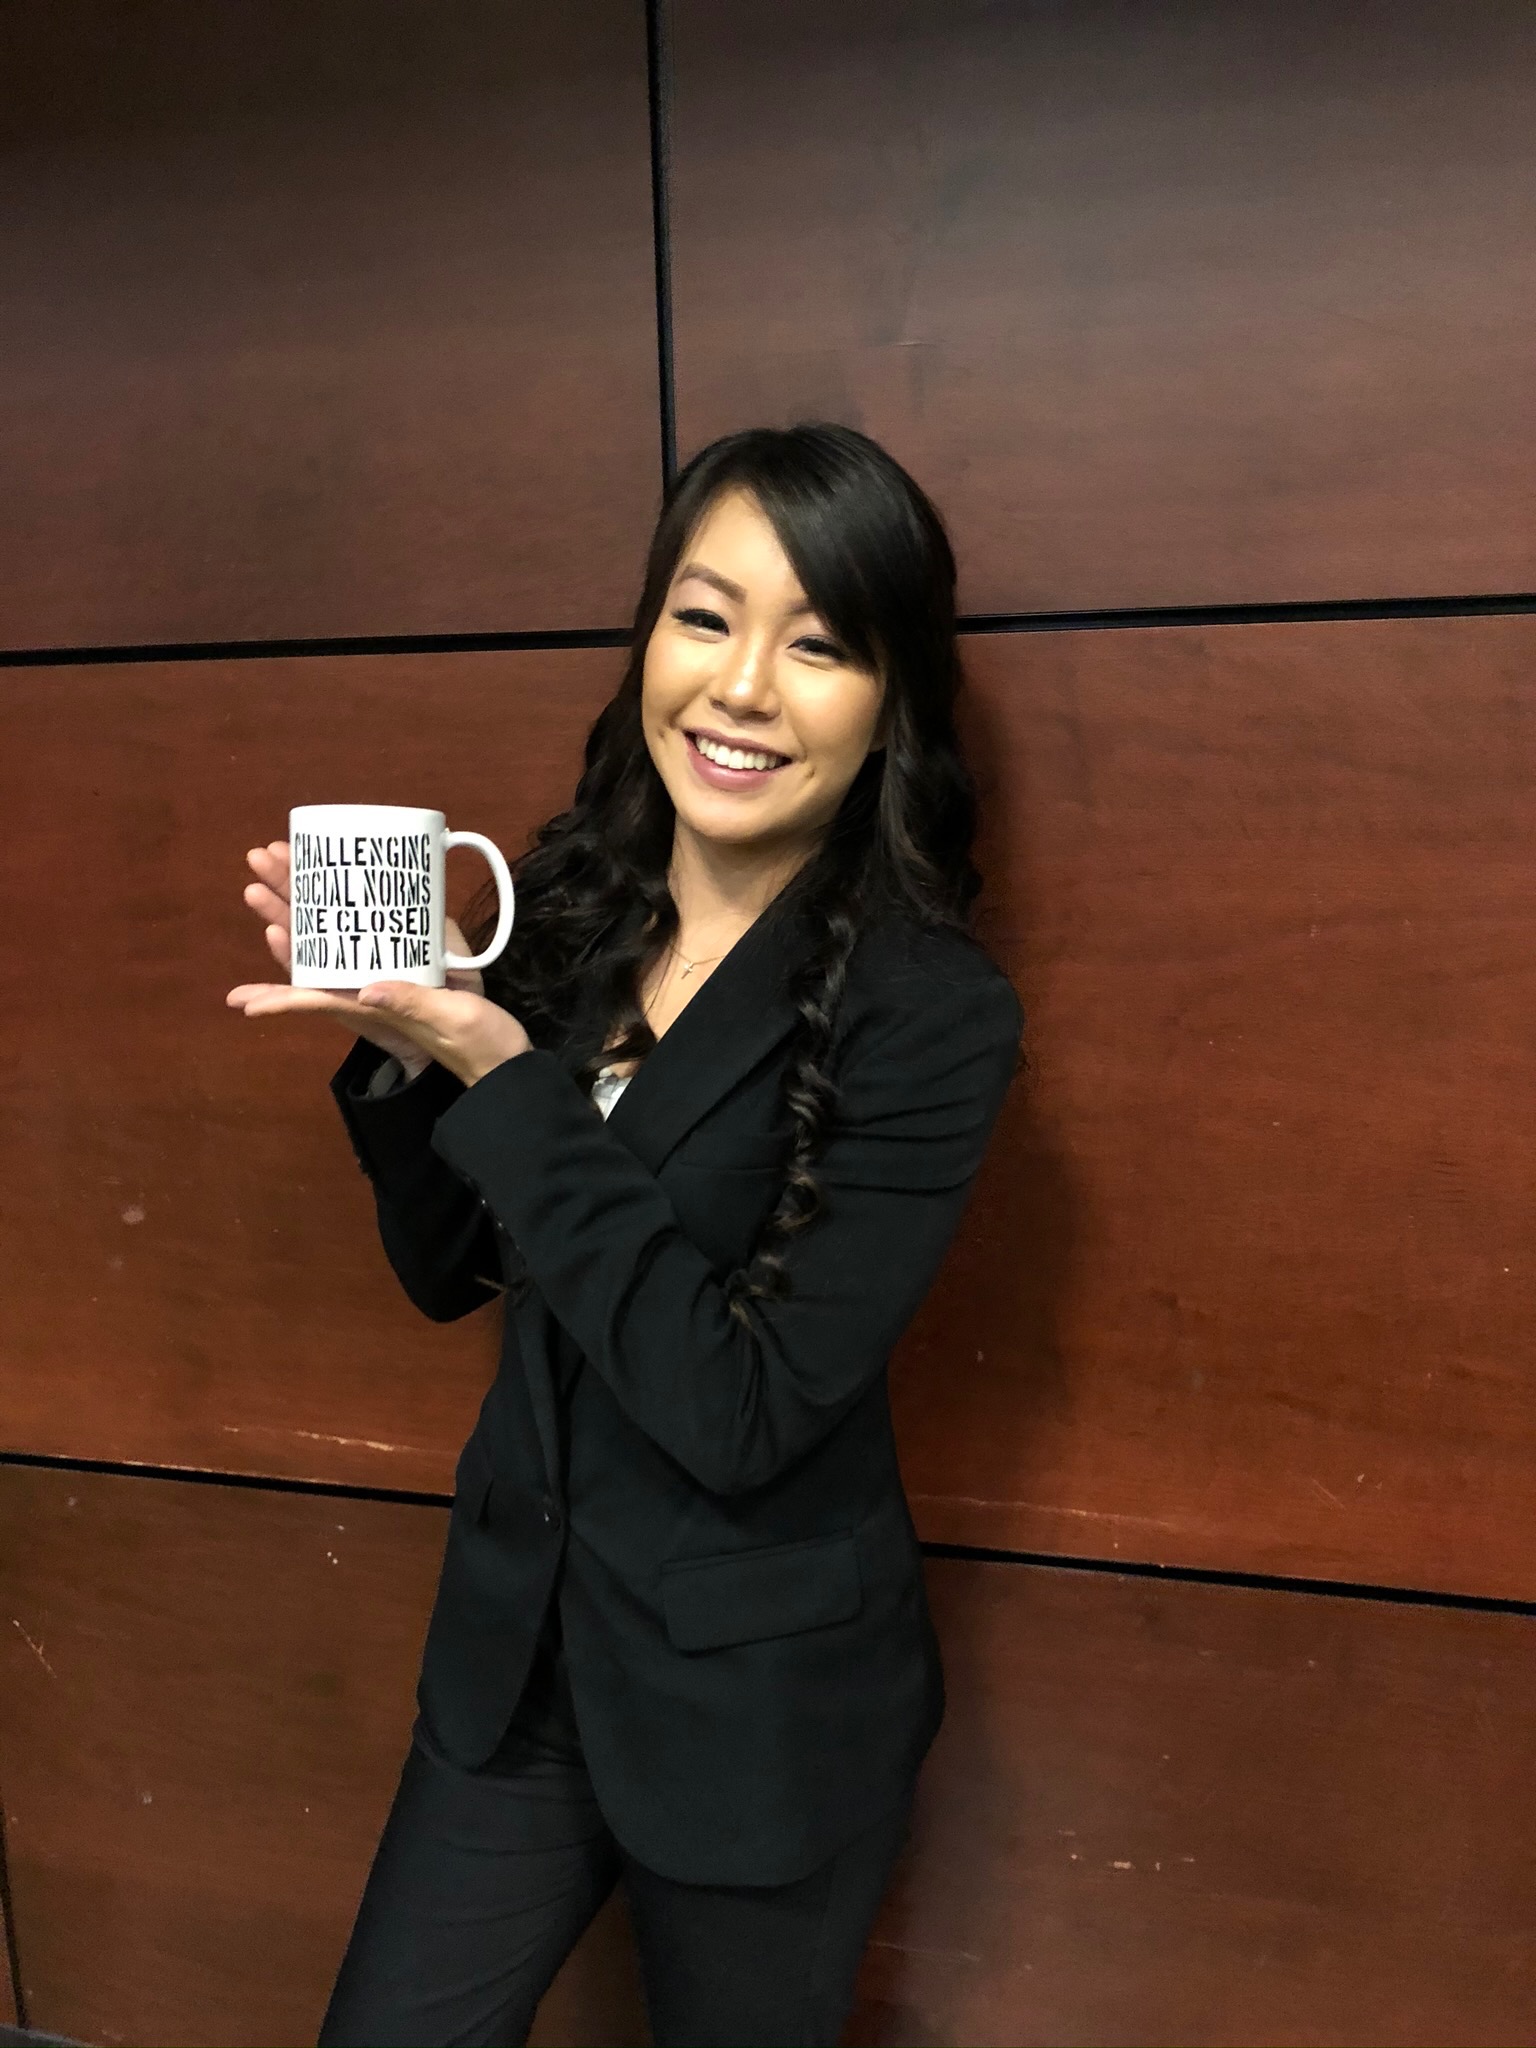 A student holding a coffee mug that they won in a raffle.